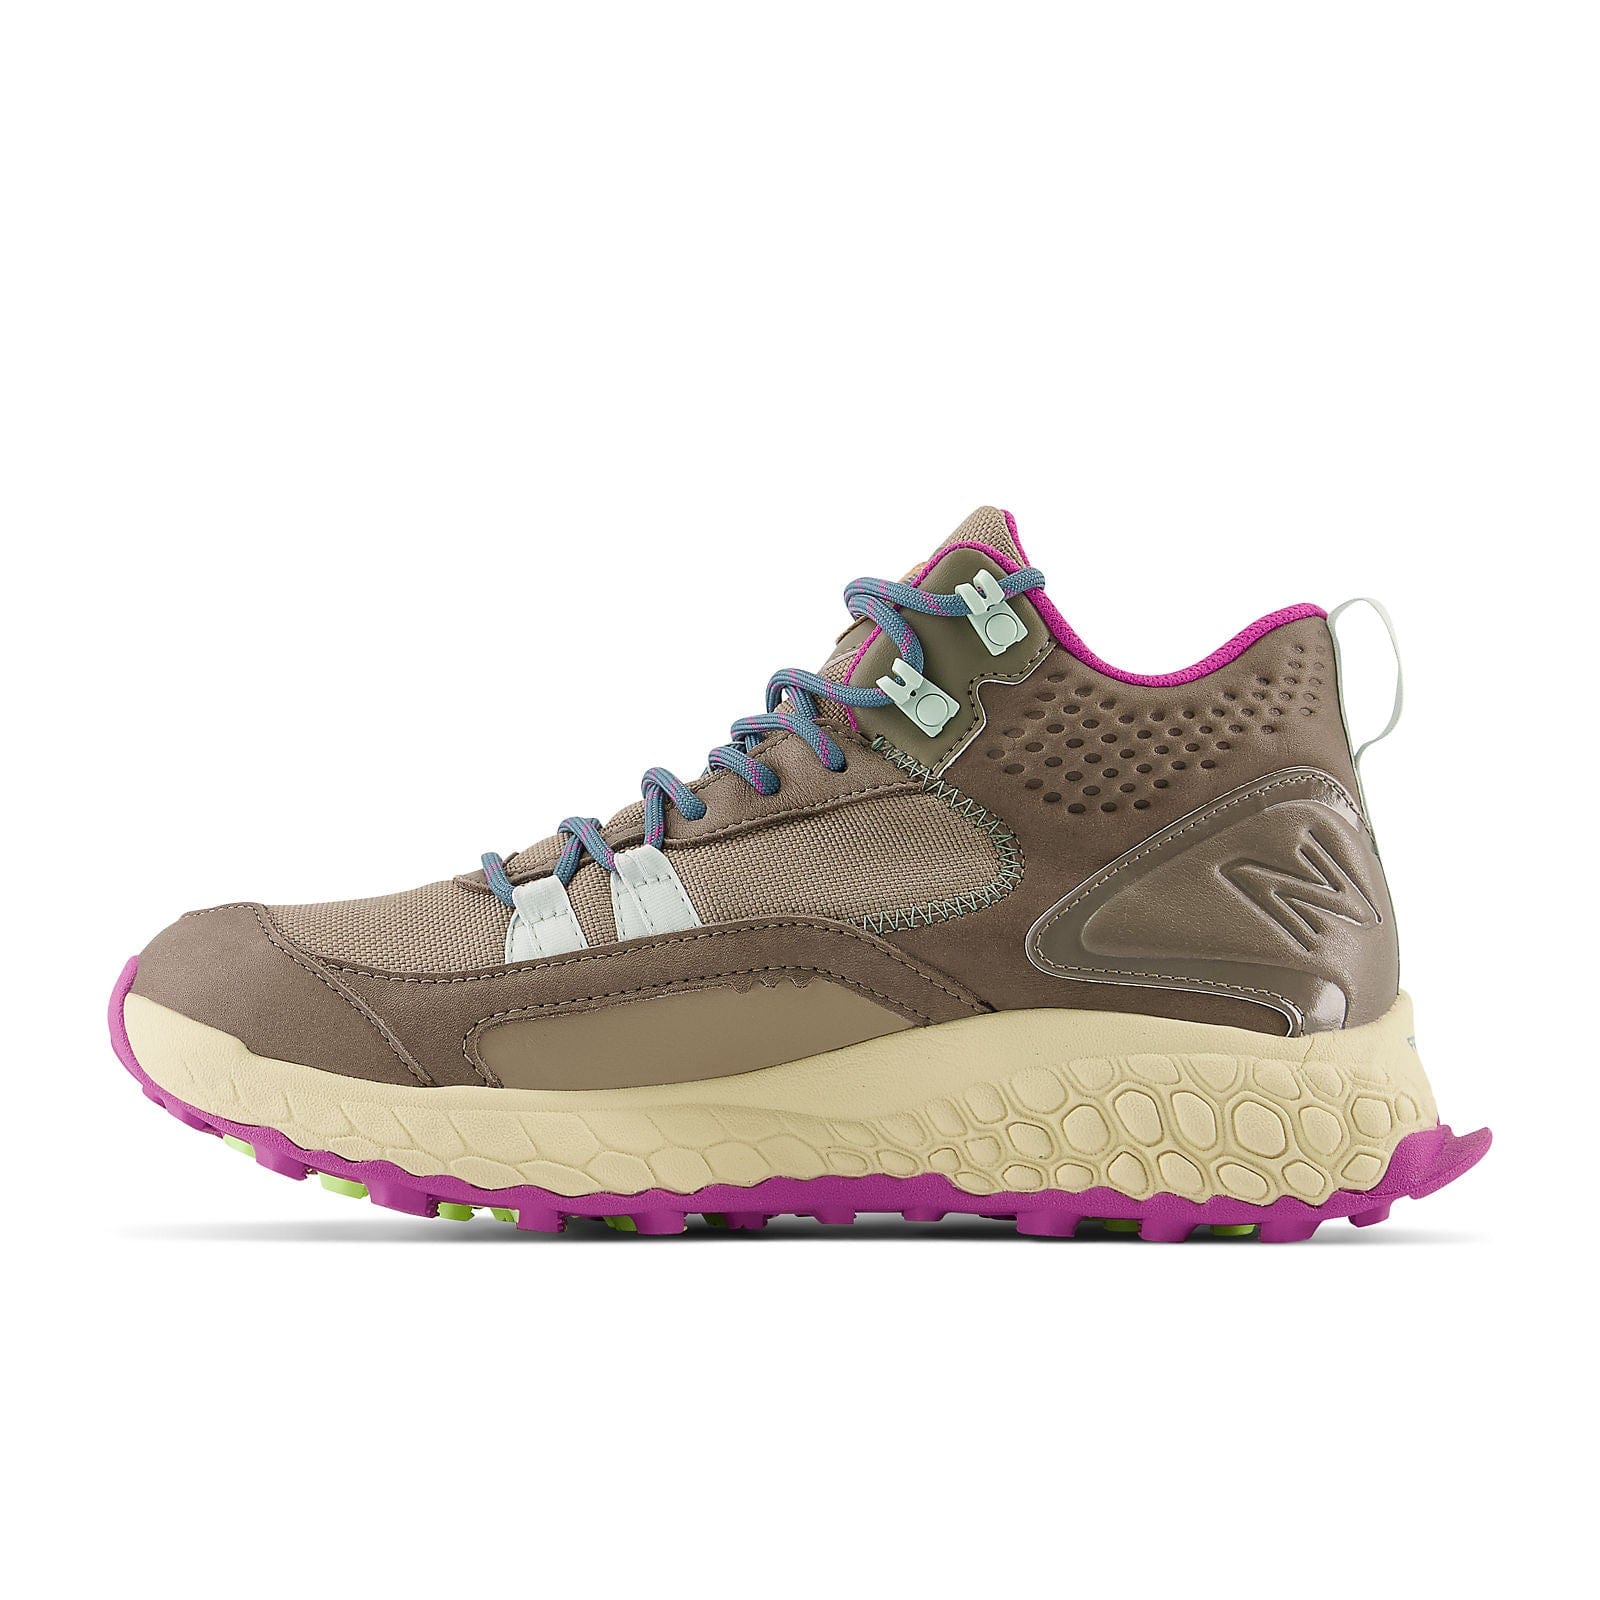 New Balance Fresh FoamX Hierro Mid GTX (Womens) - Bungee with Brindle and Cosmic Jade